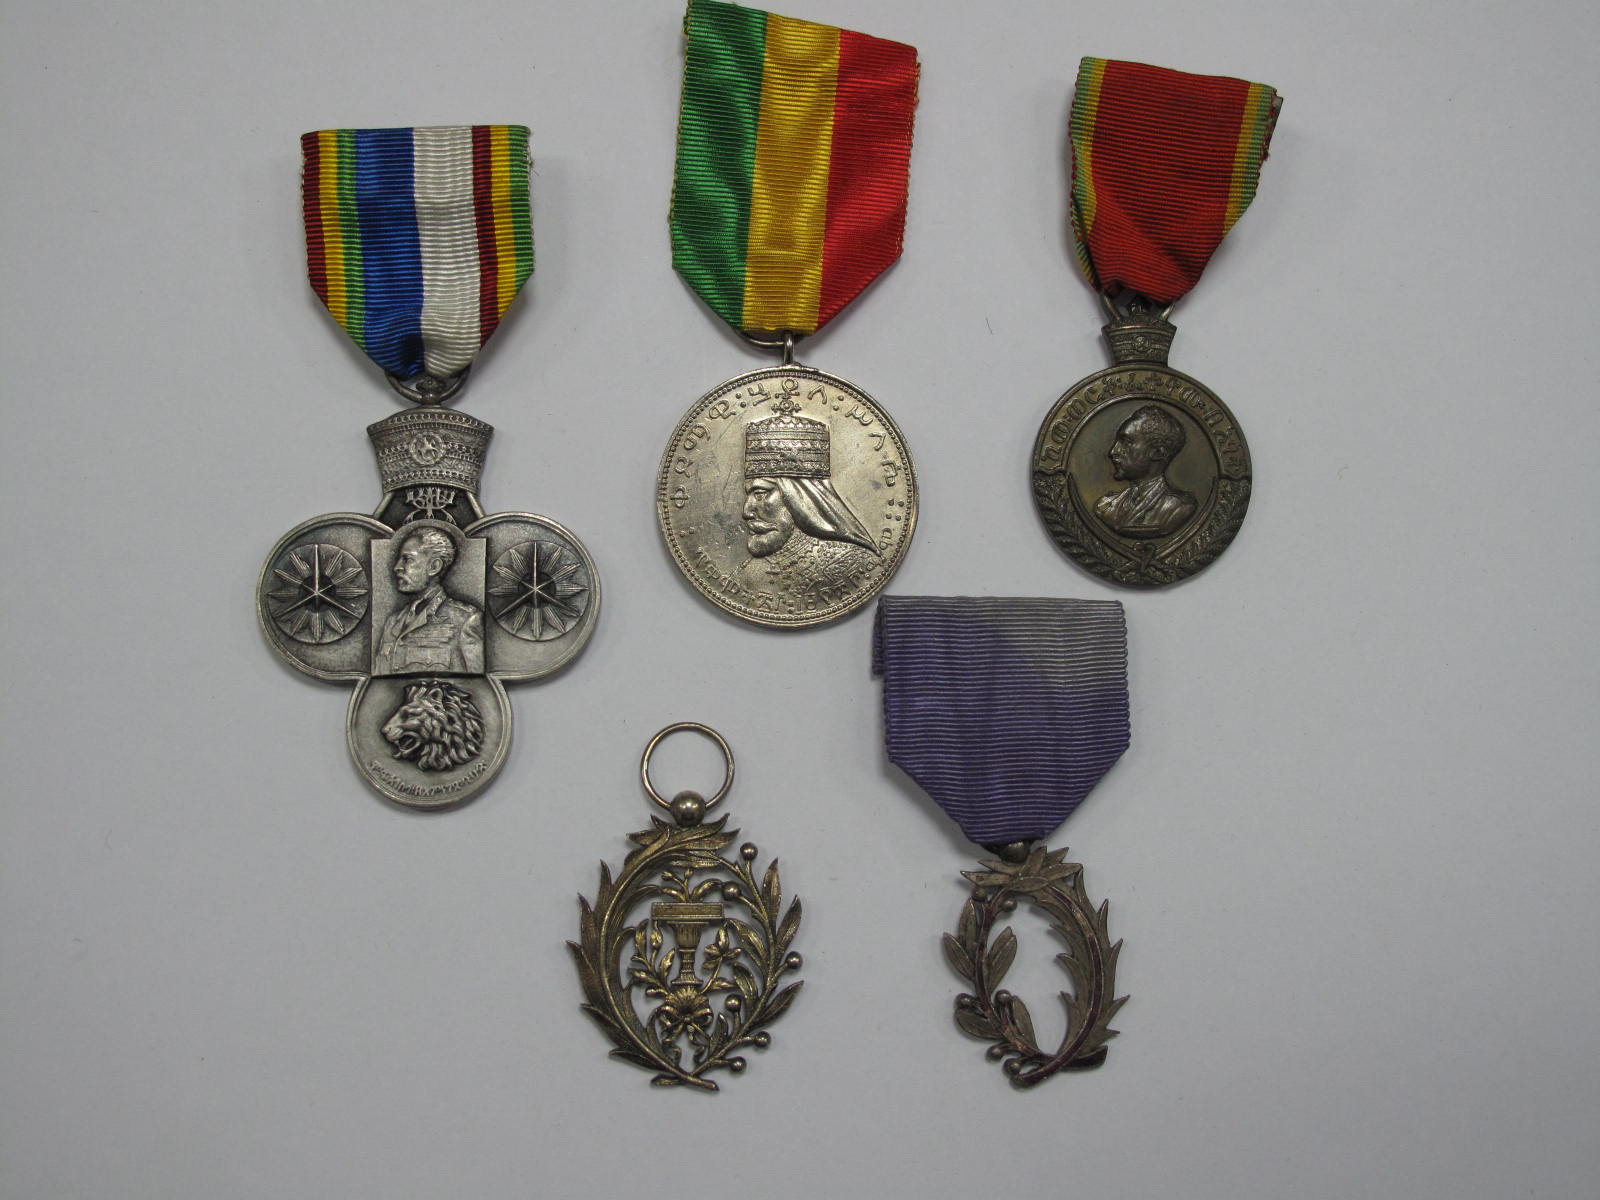 Five Medals and Orders of the World, including Korean War Medal, Ethiopia Haile Selassie Jubilee